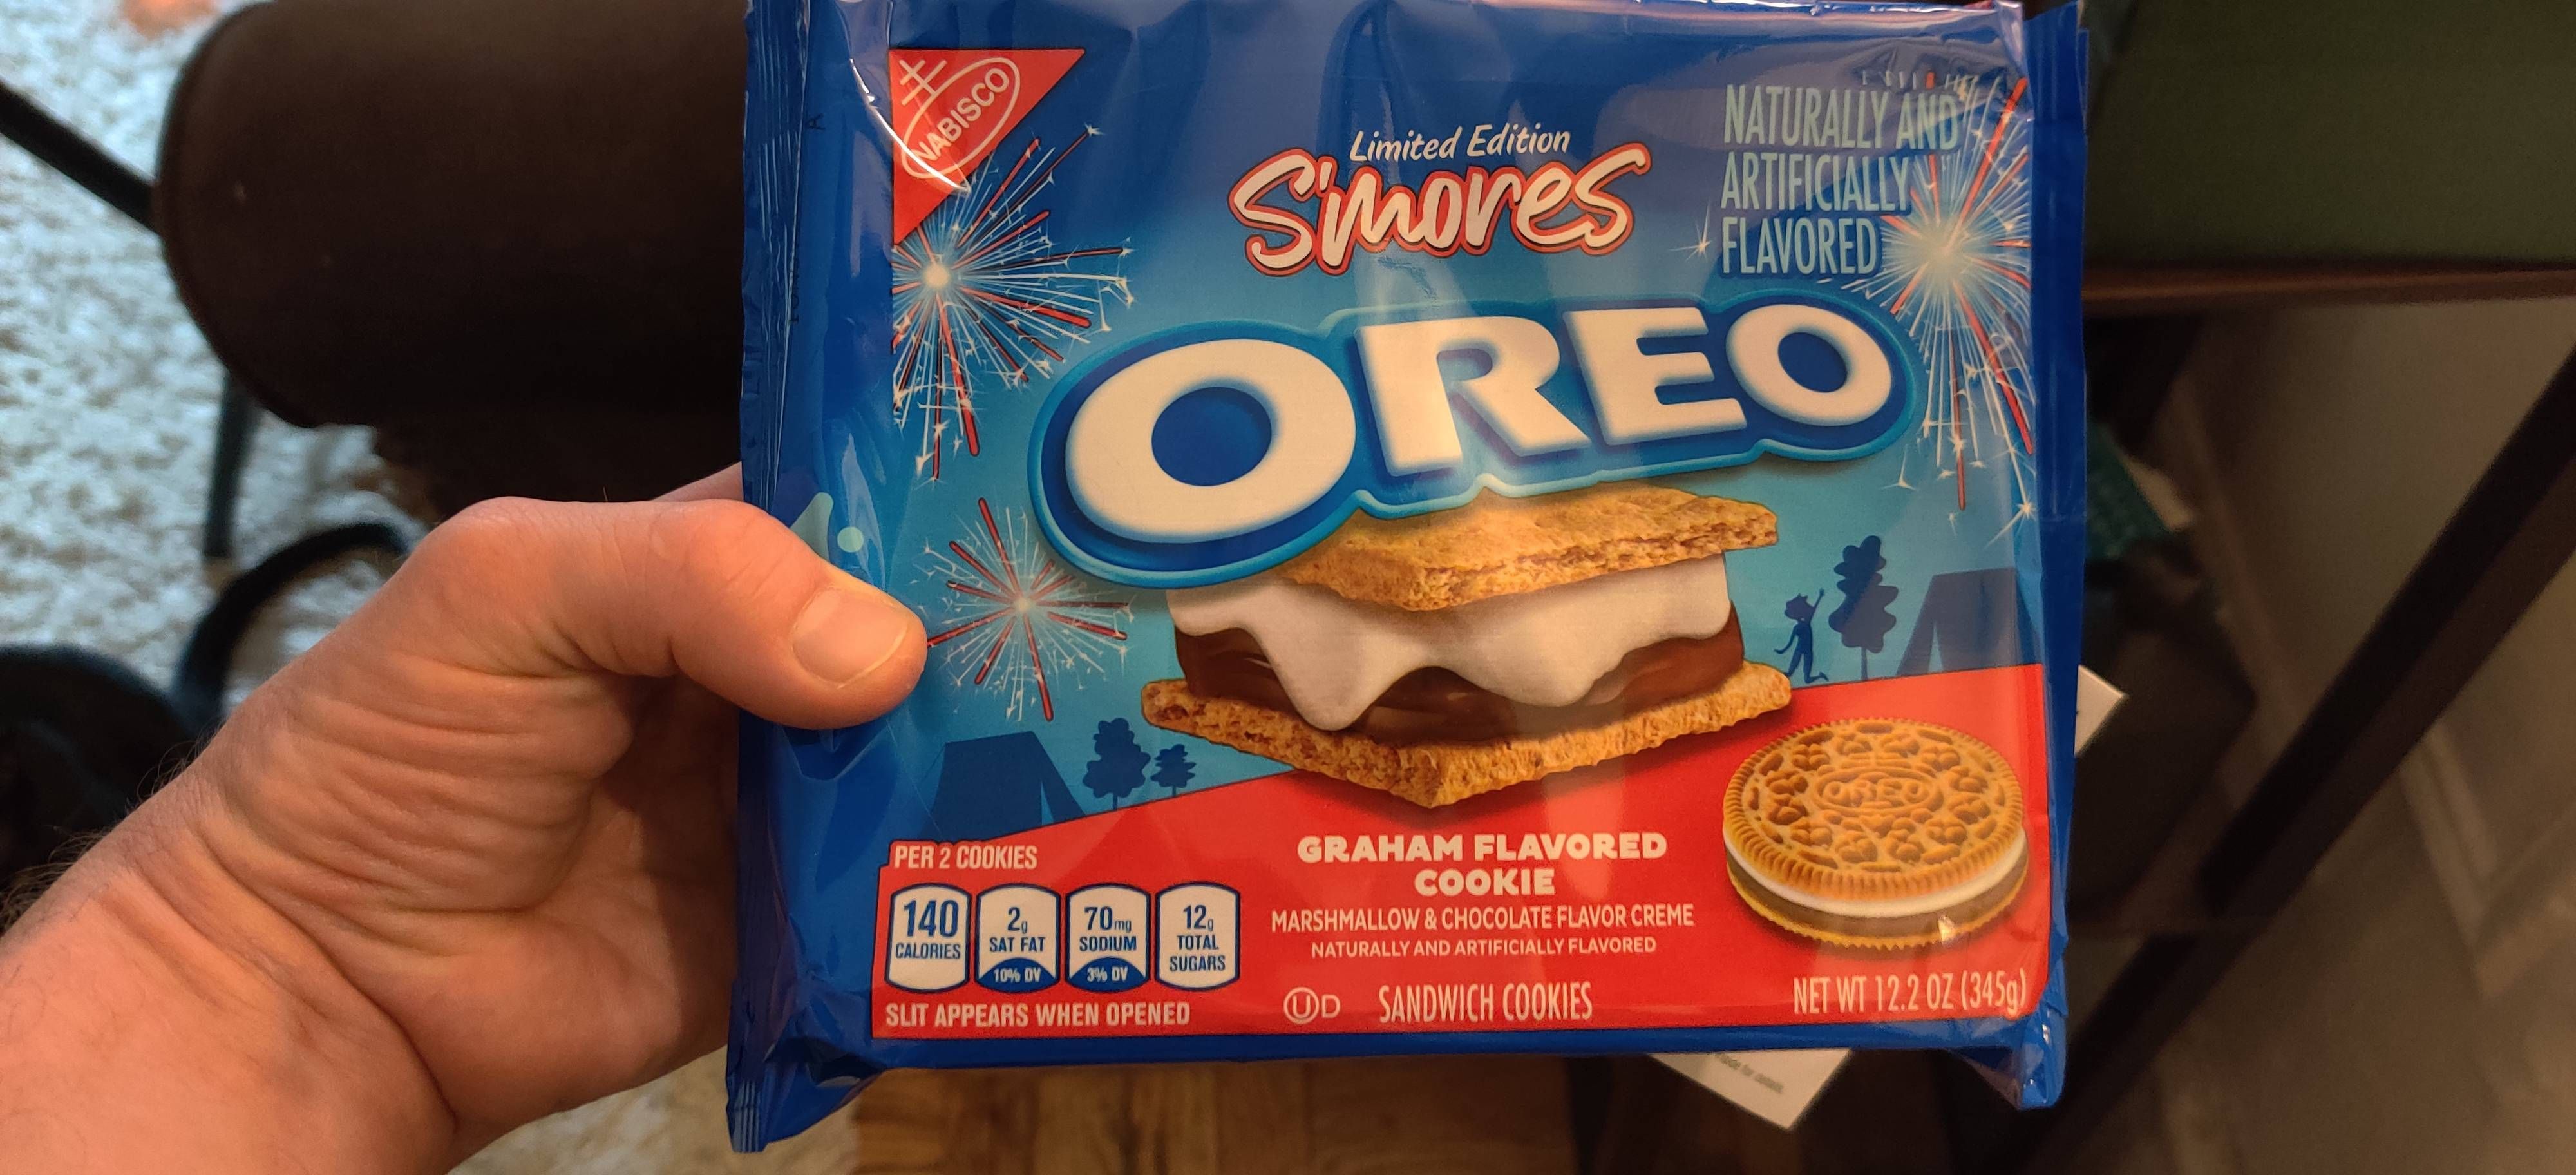 Nabisco really dropped the ball naming these